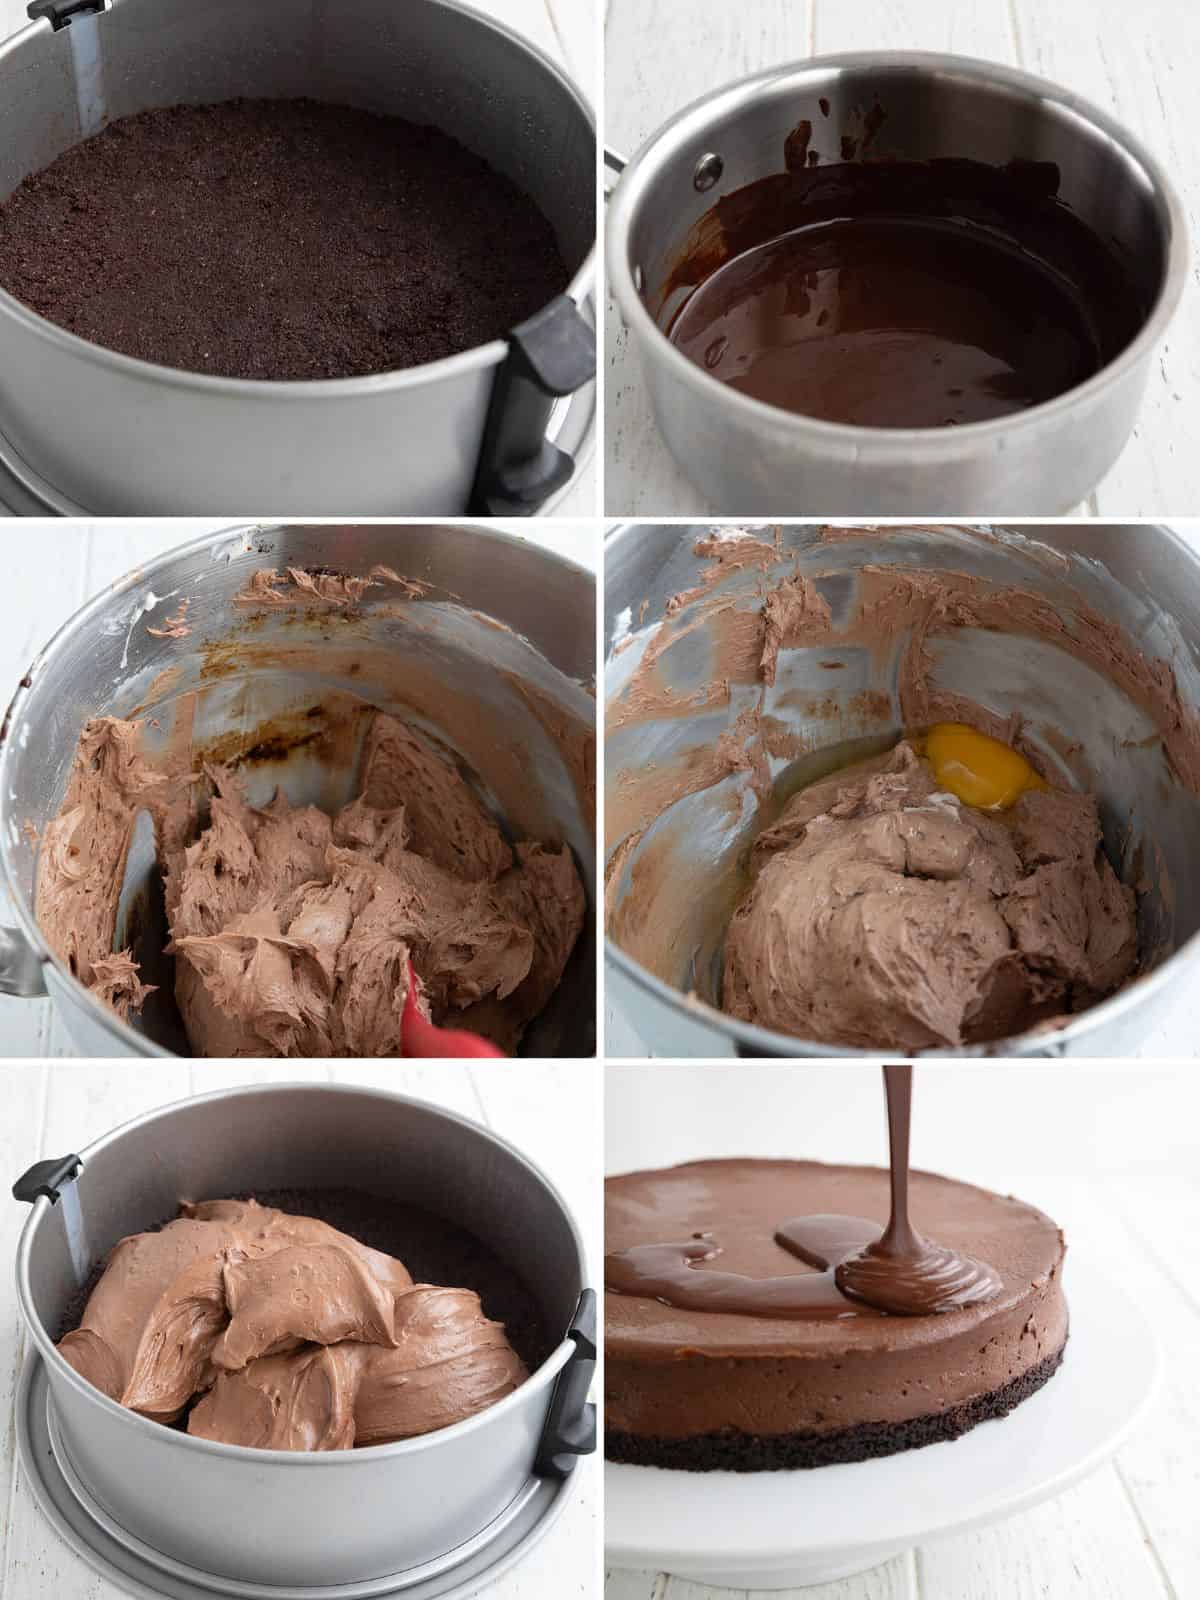 A collage of 6 images showing how to make Keto Chocolate Cheesecake.